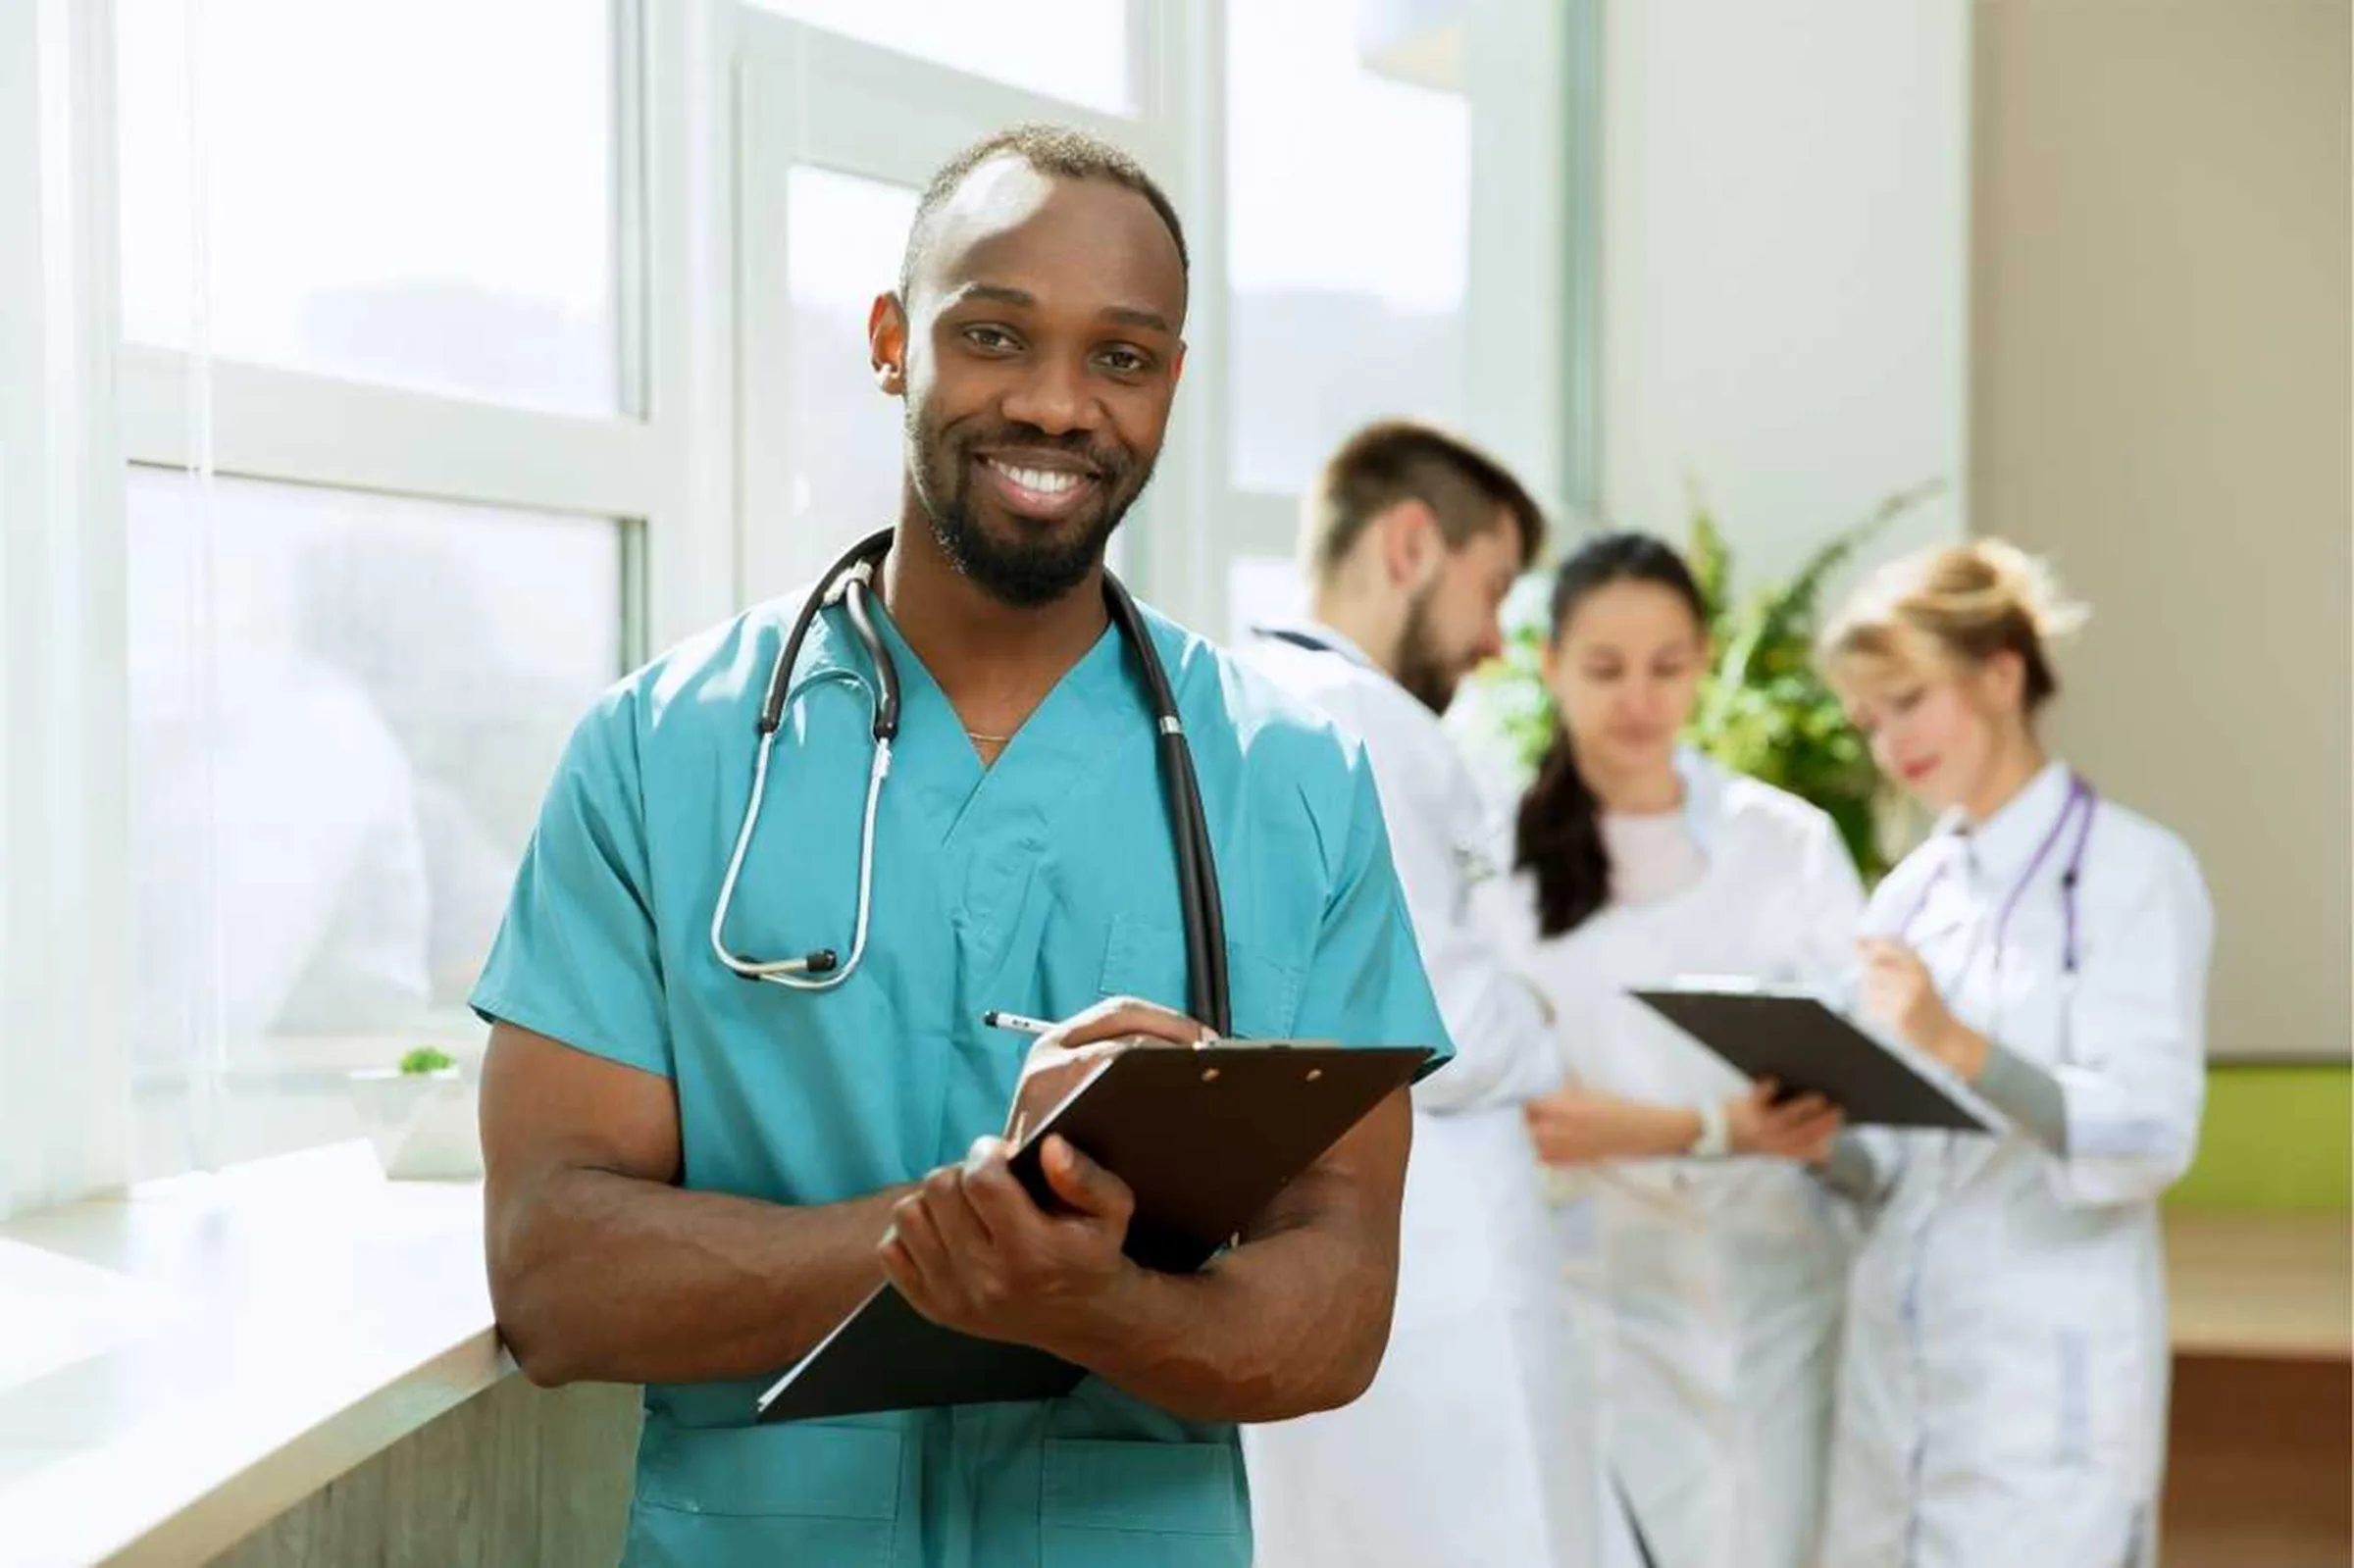 5 Tips to Find the Best Phoenix Healthcare Jobs and Career Fields